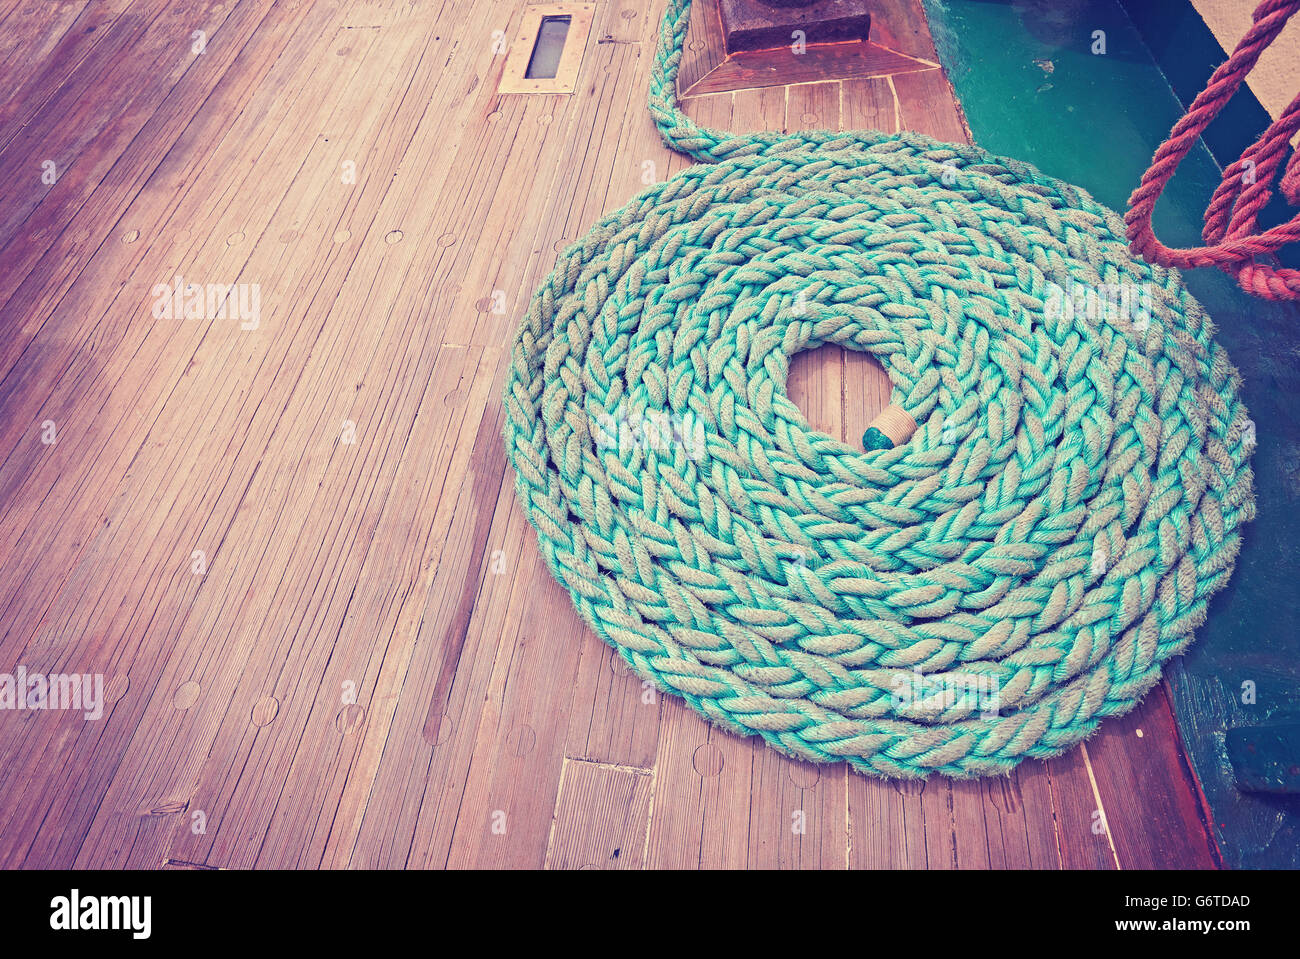 Vintage toned wide angle picture of mooring rope on wooden deck of a sailboat. Stock Photo